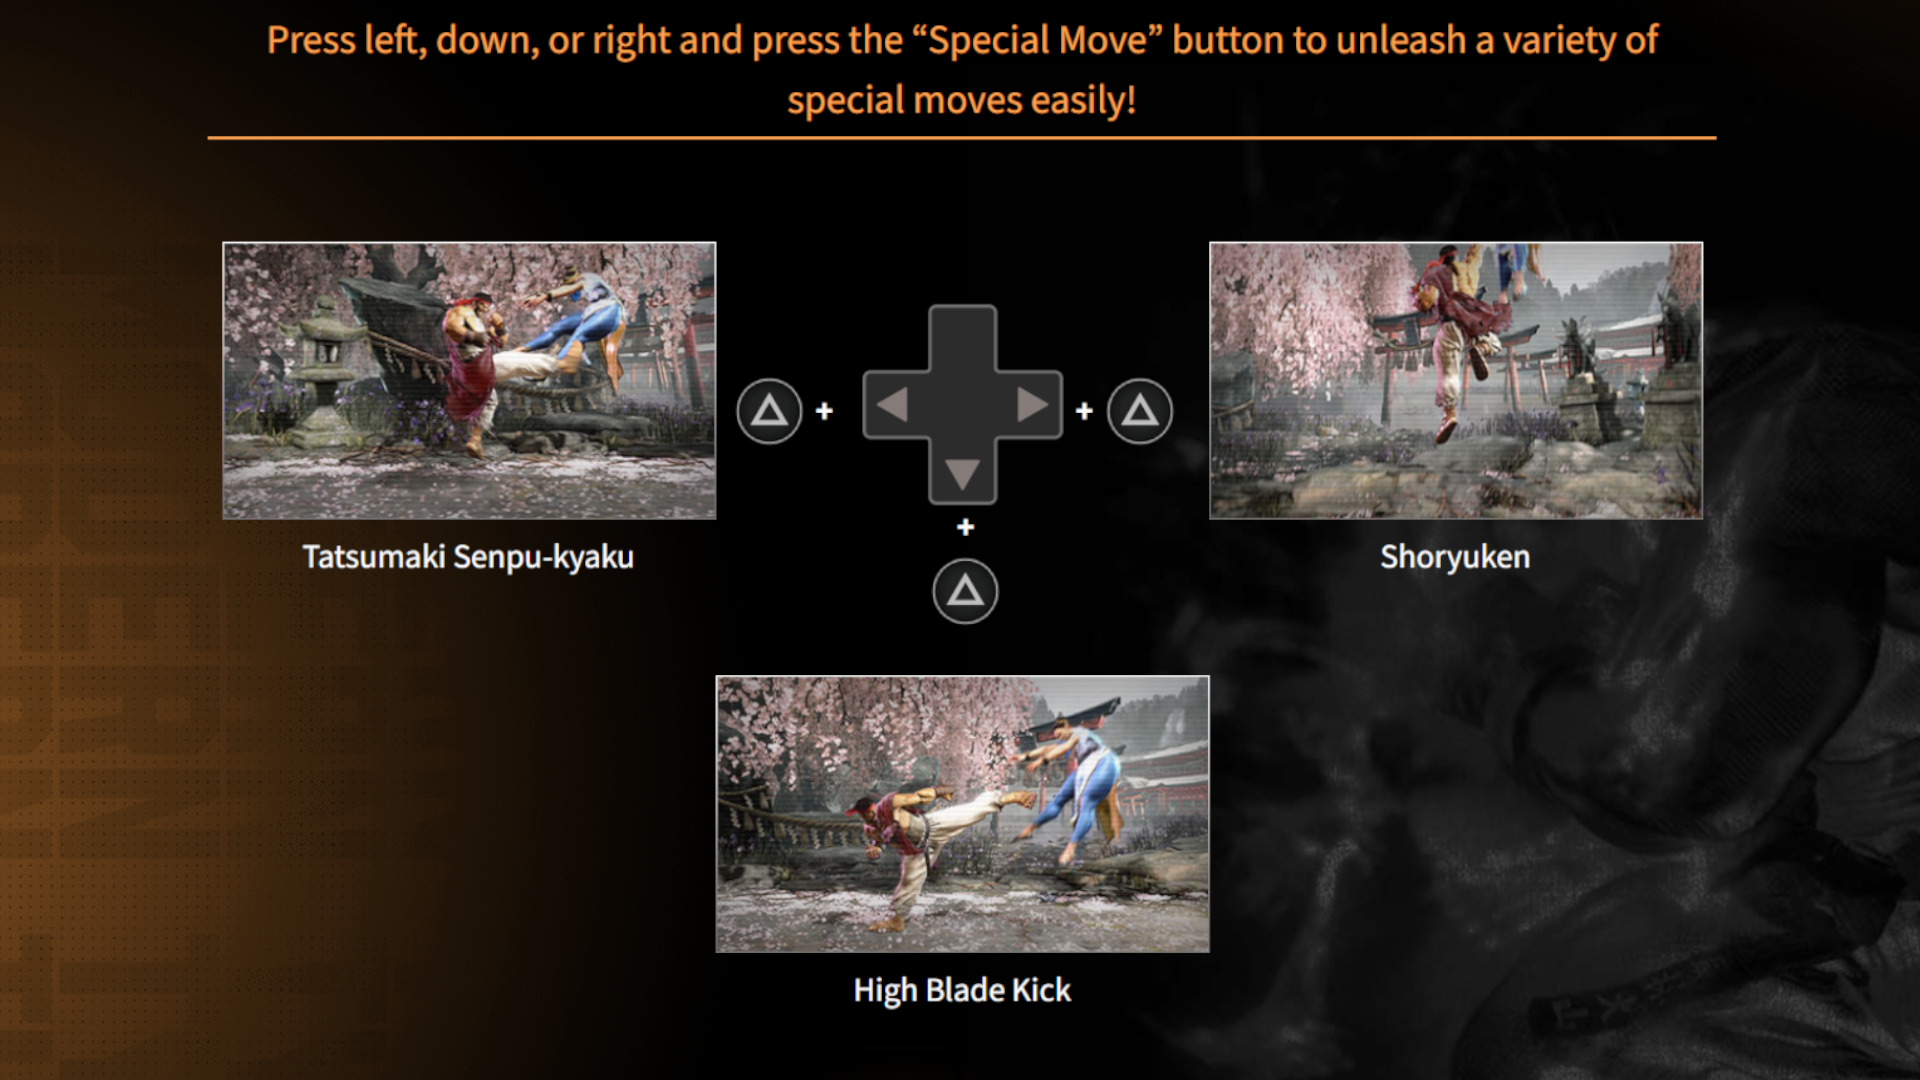 Special Moves examples